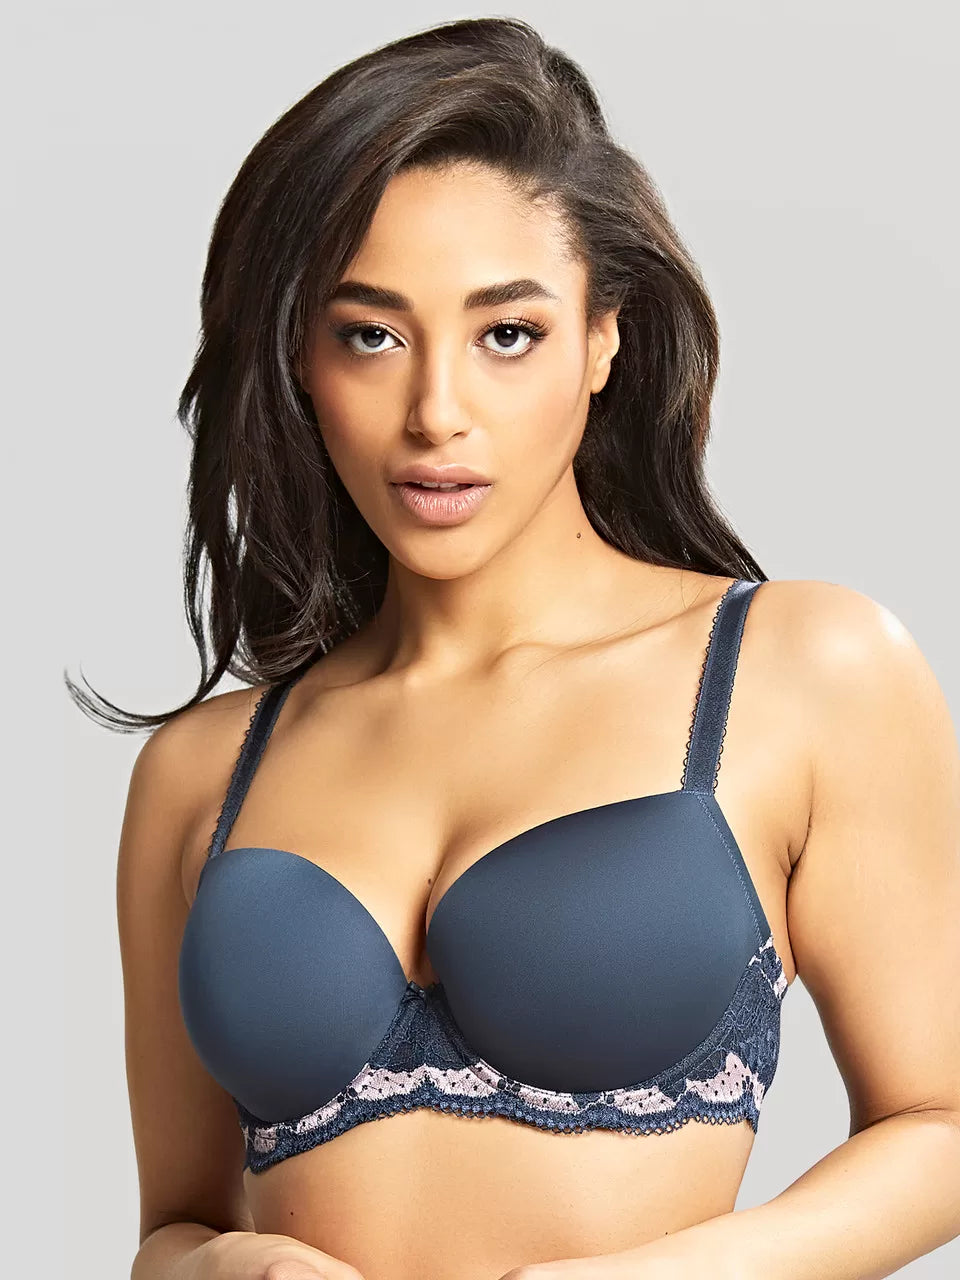 Clara Moulded Sweetheart Bra from Panache at Belle Lacet Lingerie